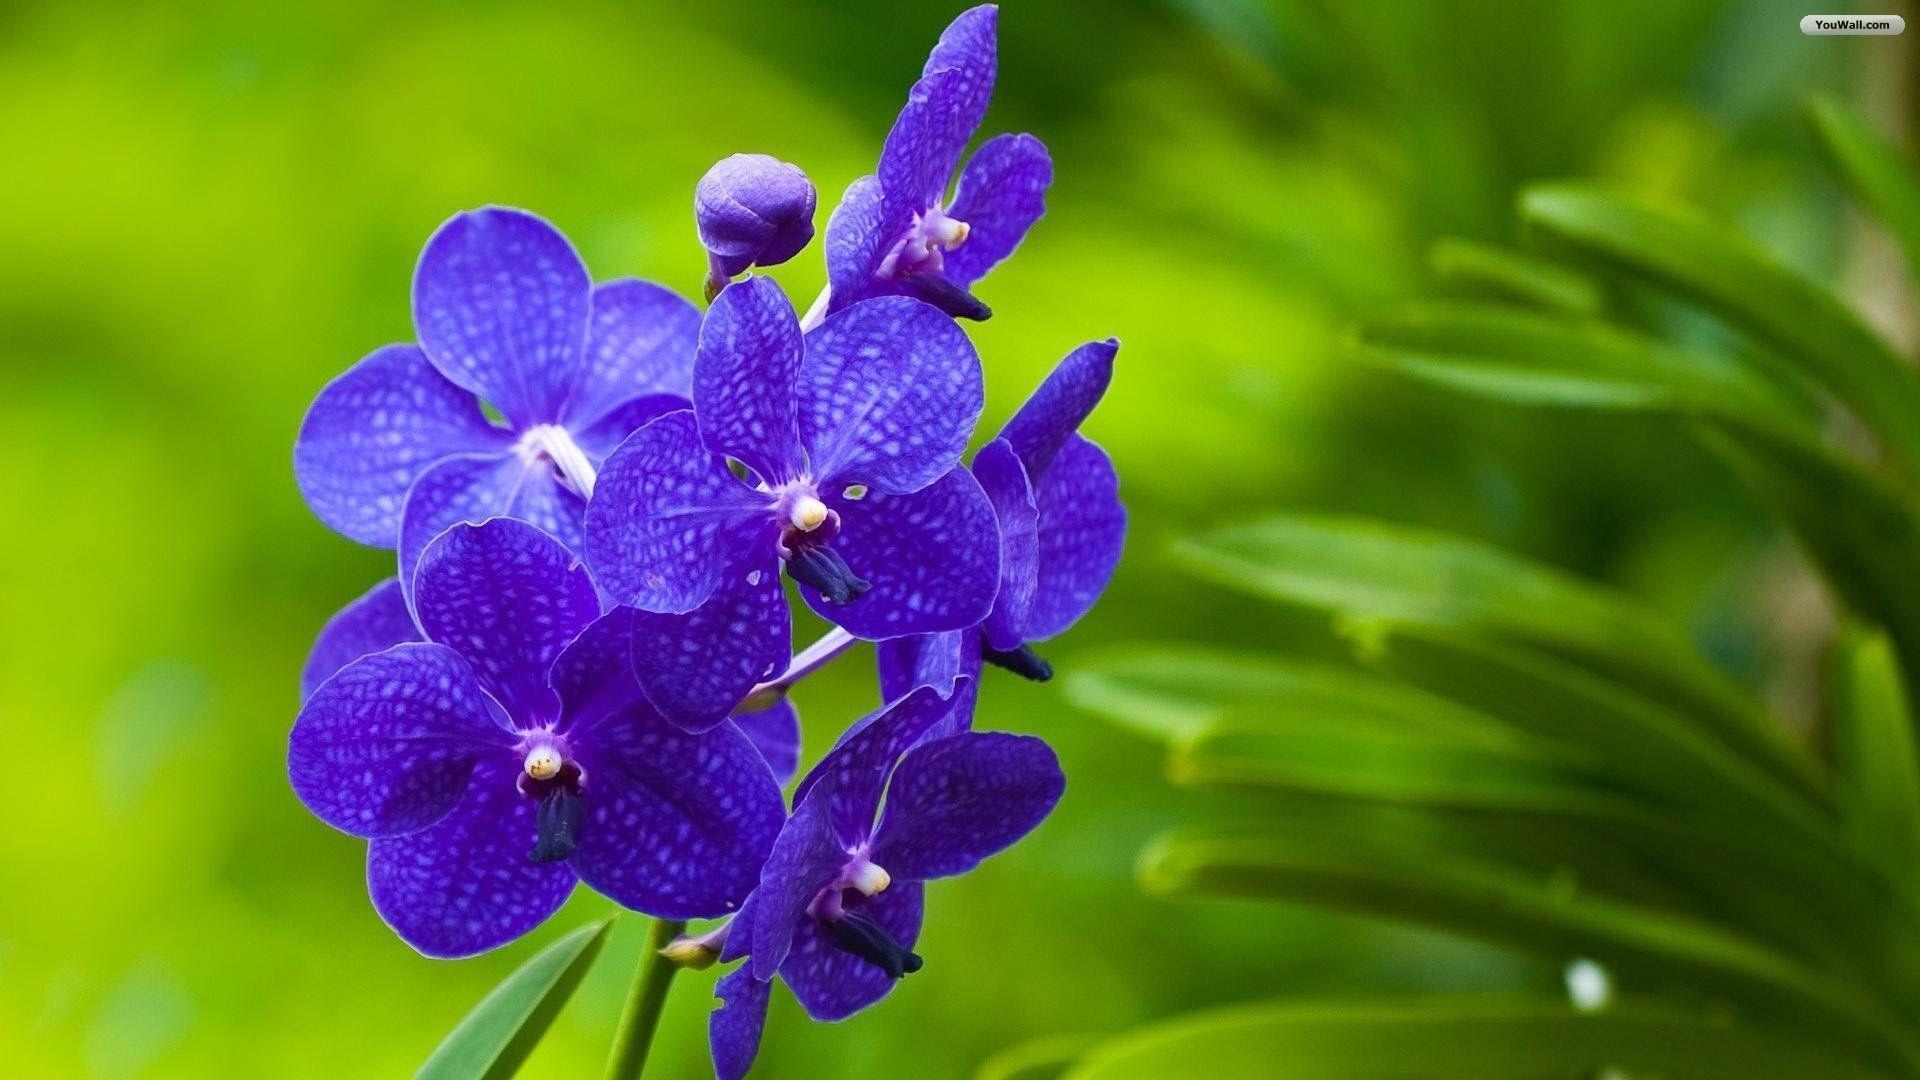 Purple Yellow Flowers Wallpaper In 1920x1080 Car Picture